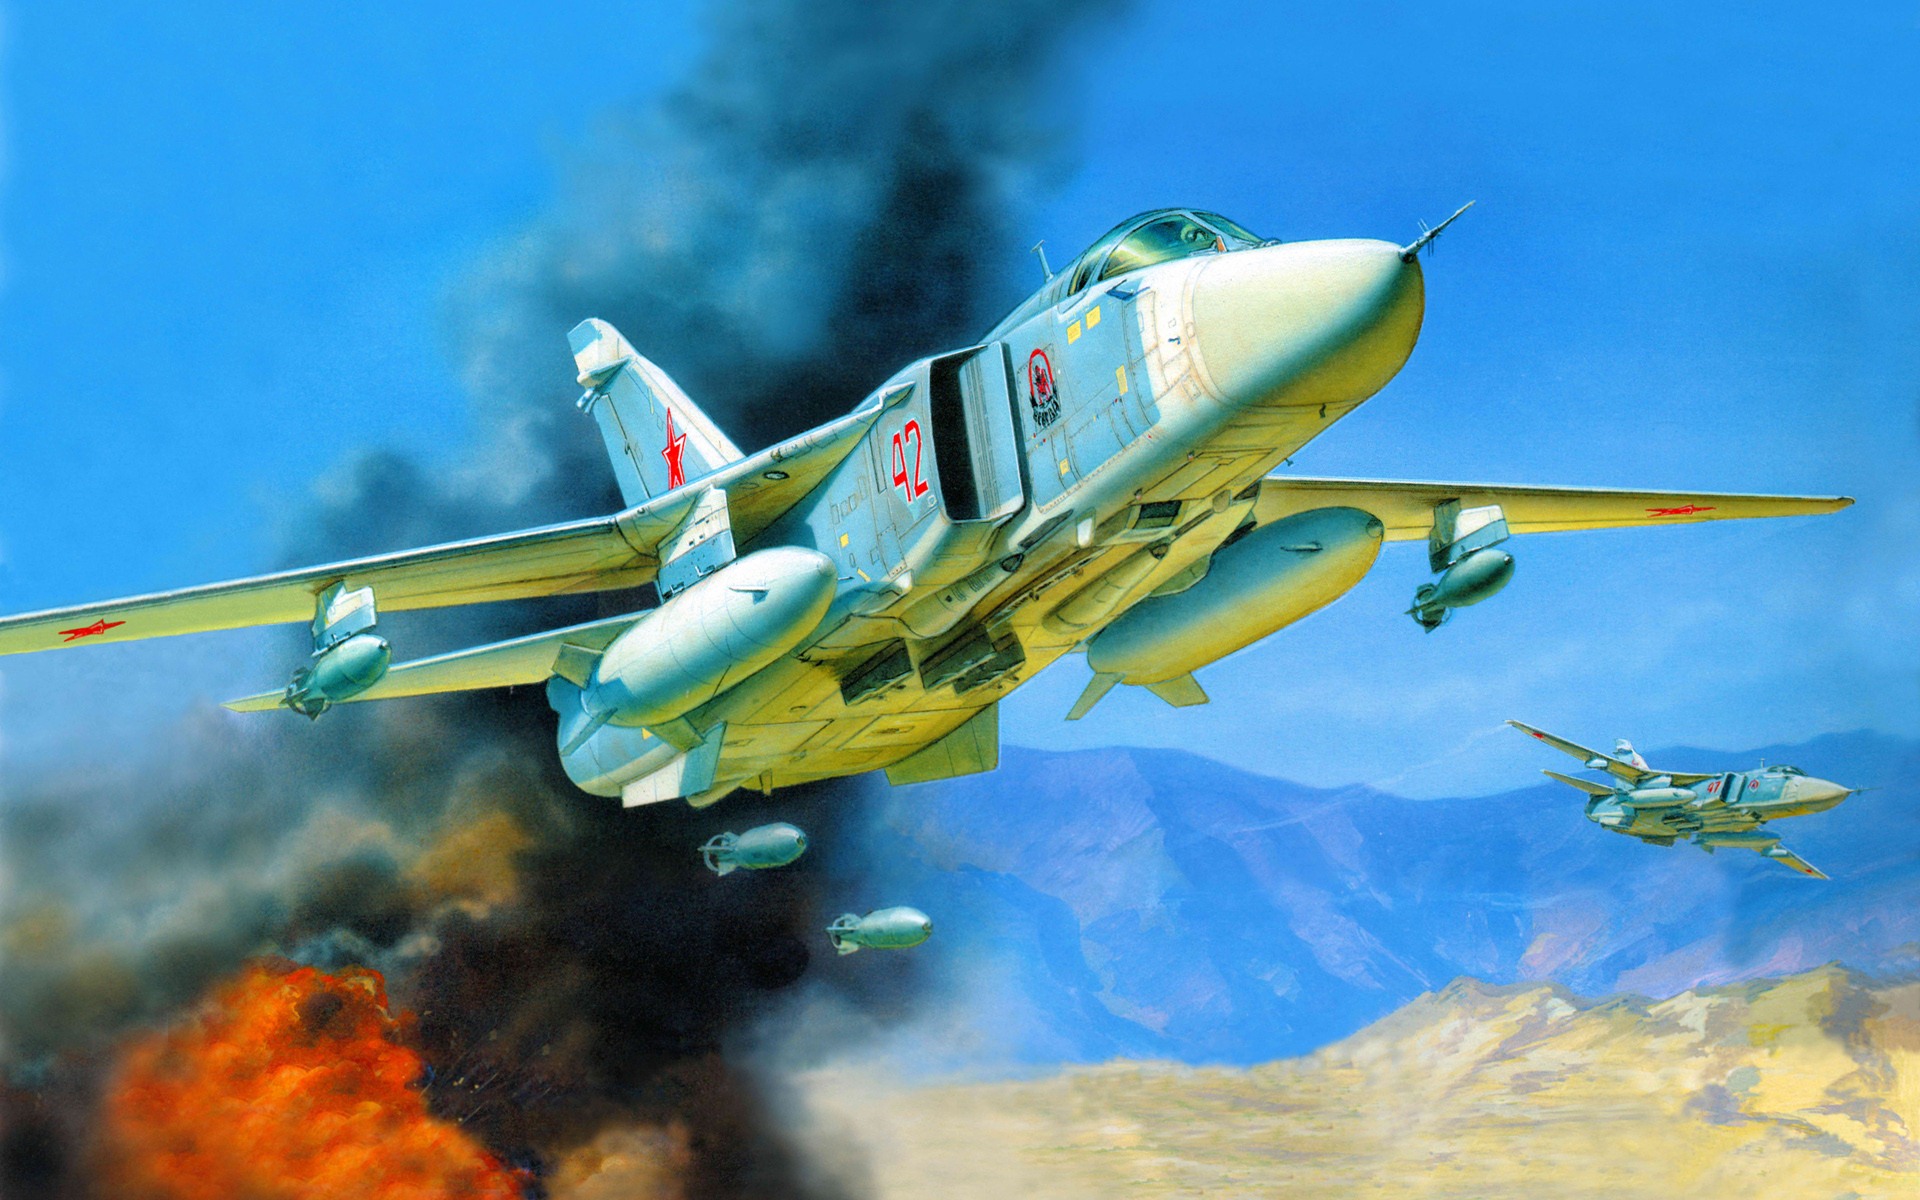 Military aircraft flight exquisite painting wallpapers #3 - 1920x1200